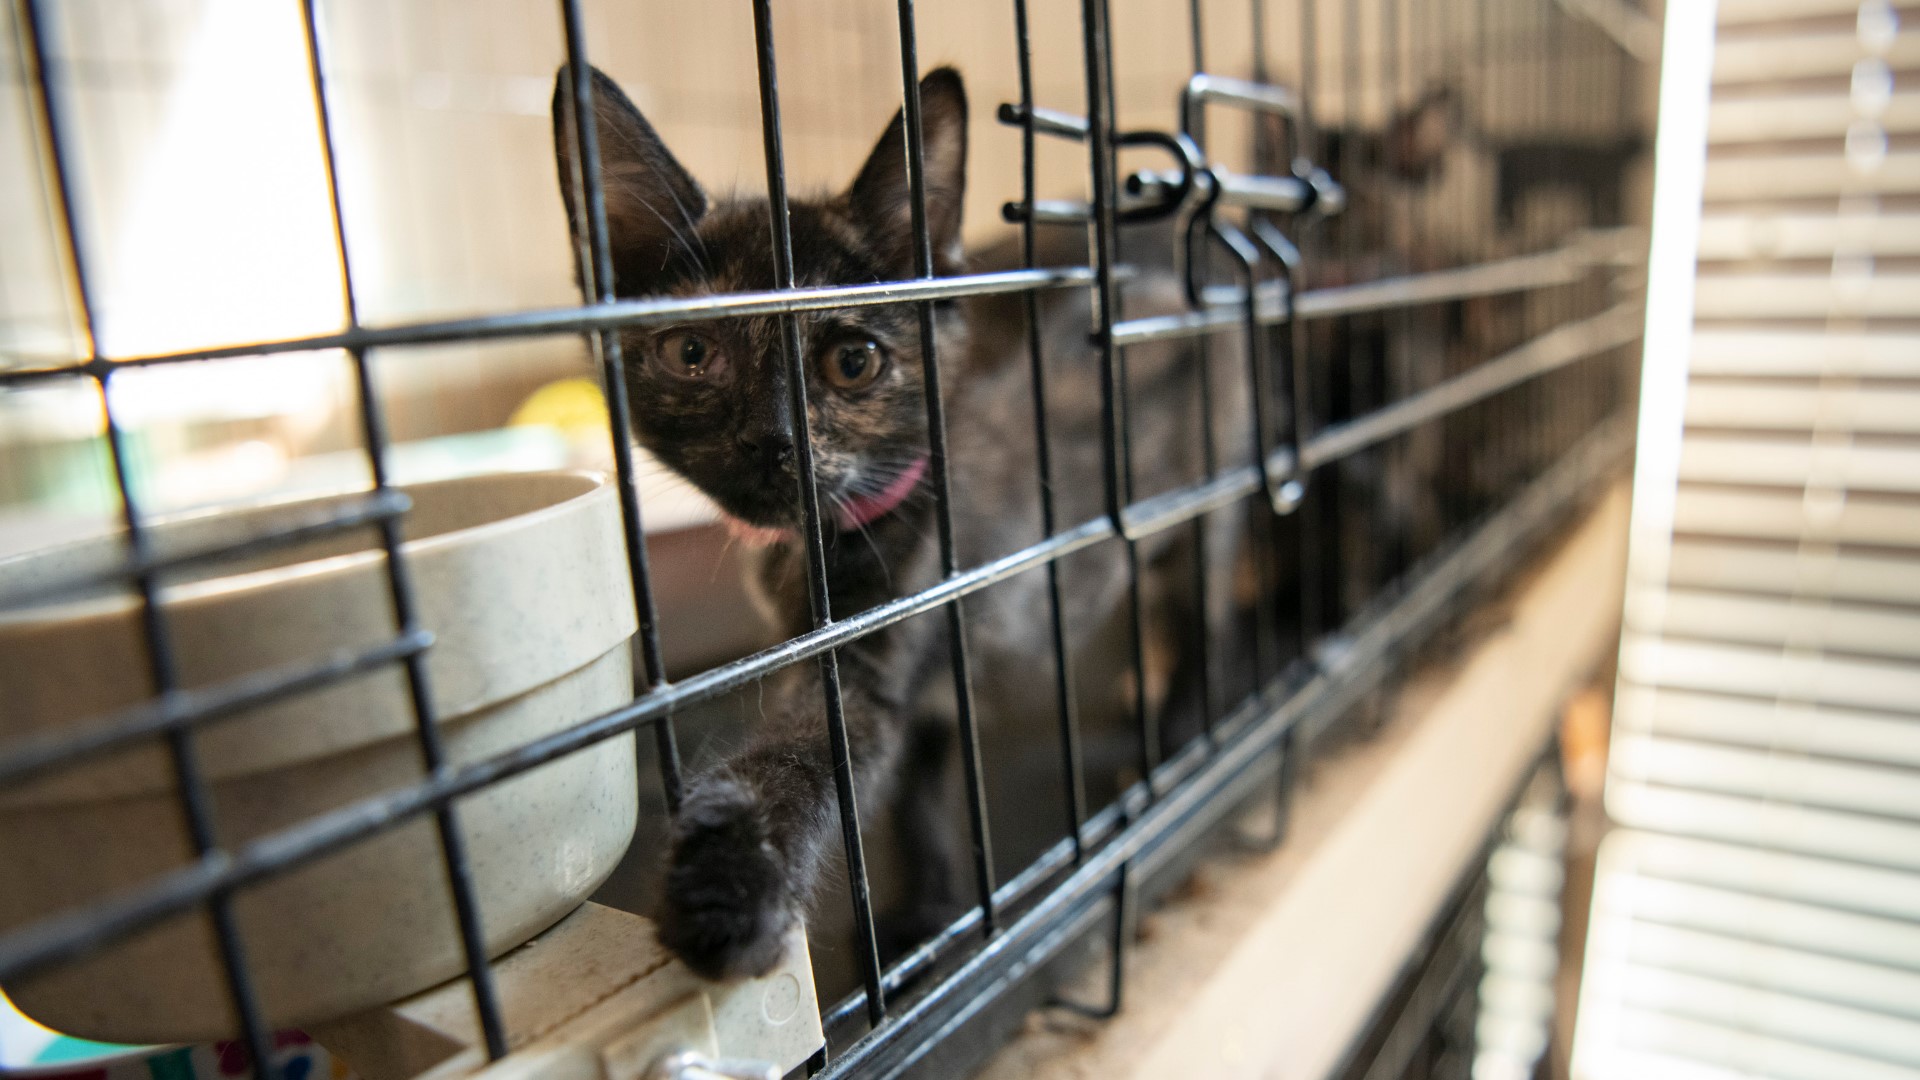 Twenty cats were rushed to the vet in critical condition and two had to be euthenized after almost 200 animals were taken from a Killeen property.